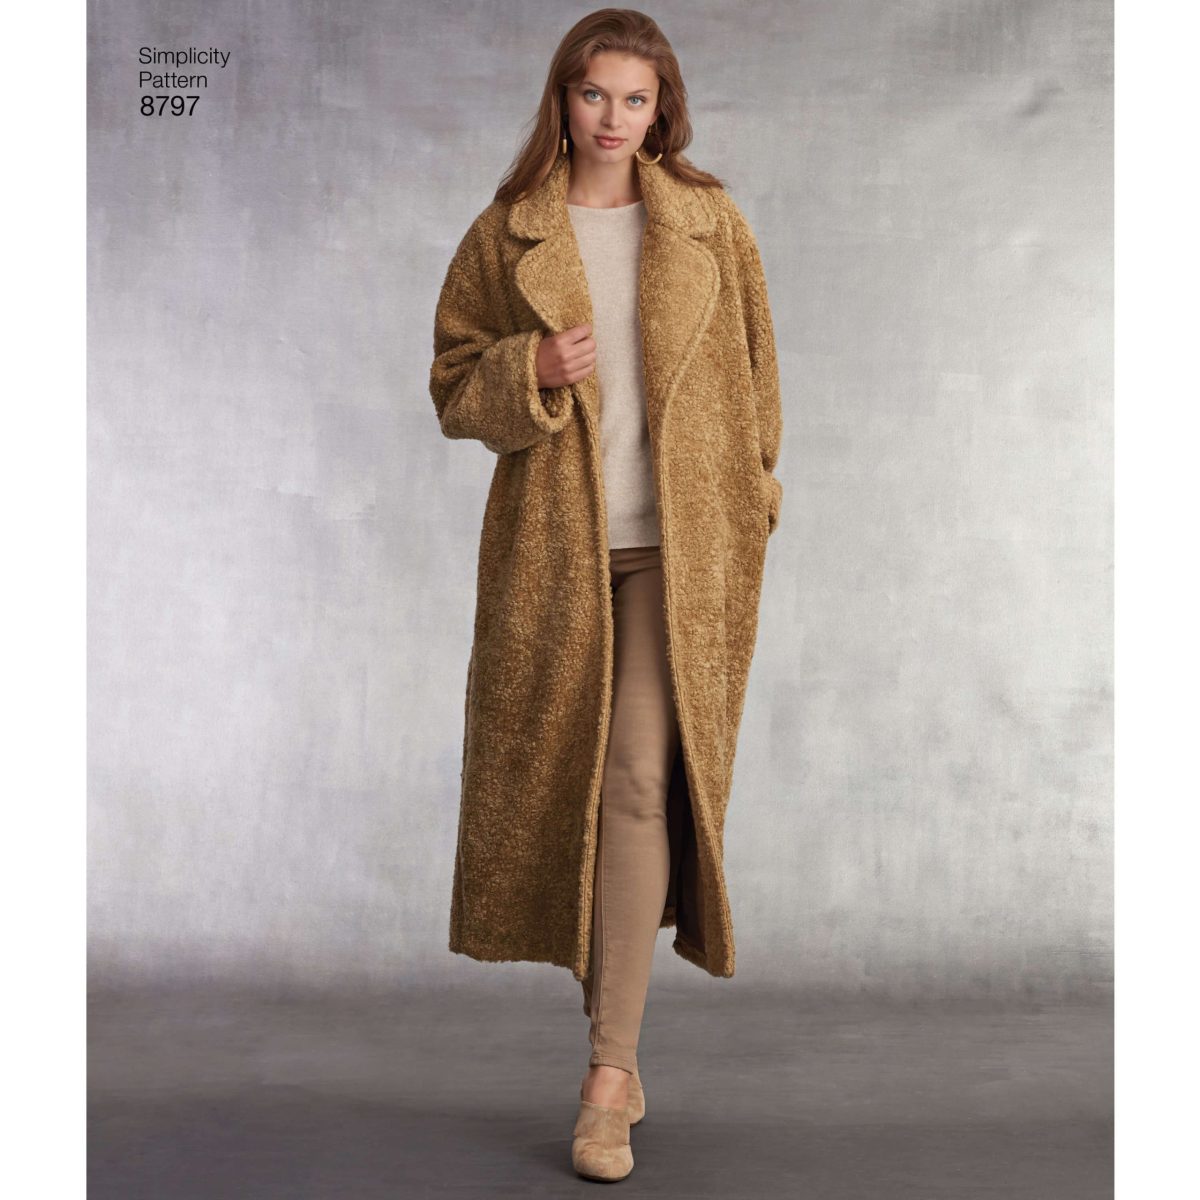 Simplicity Sewing Pattern 8797 Misses Loose Fitting Lined Coat